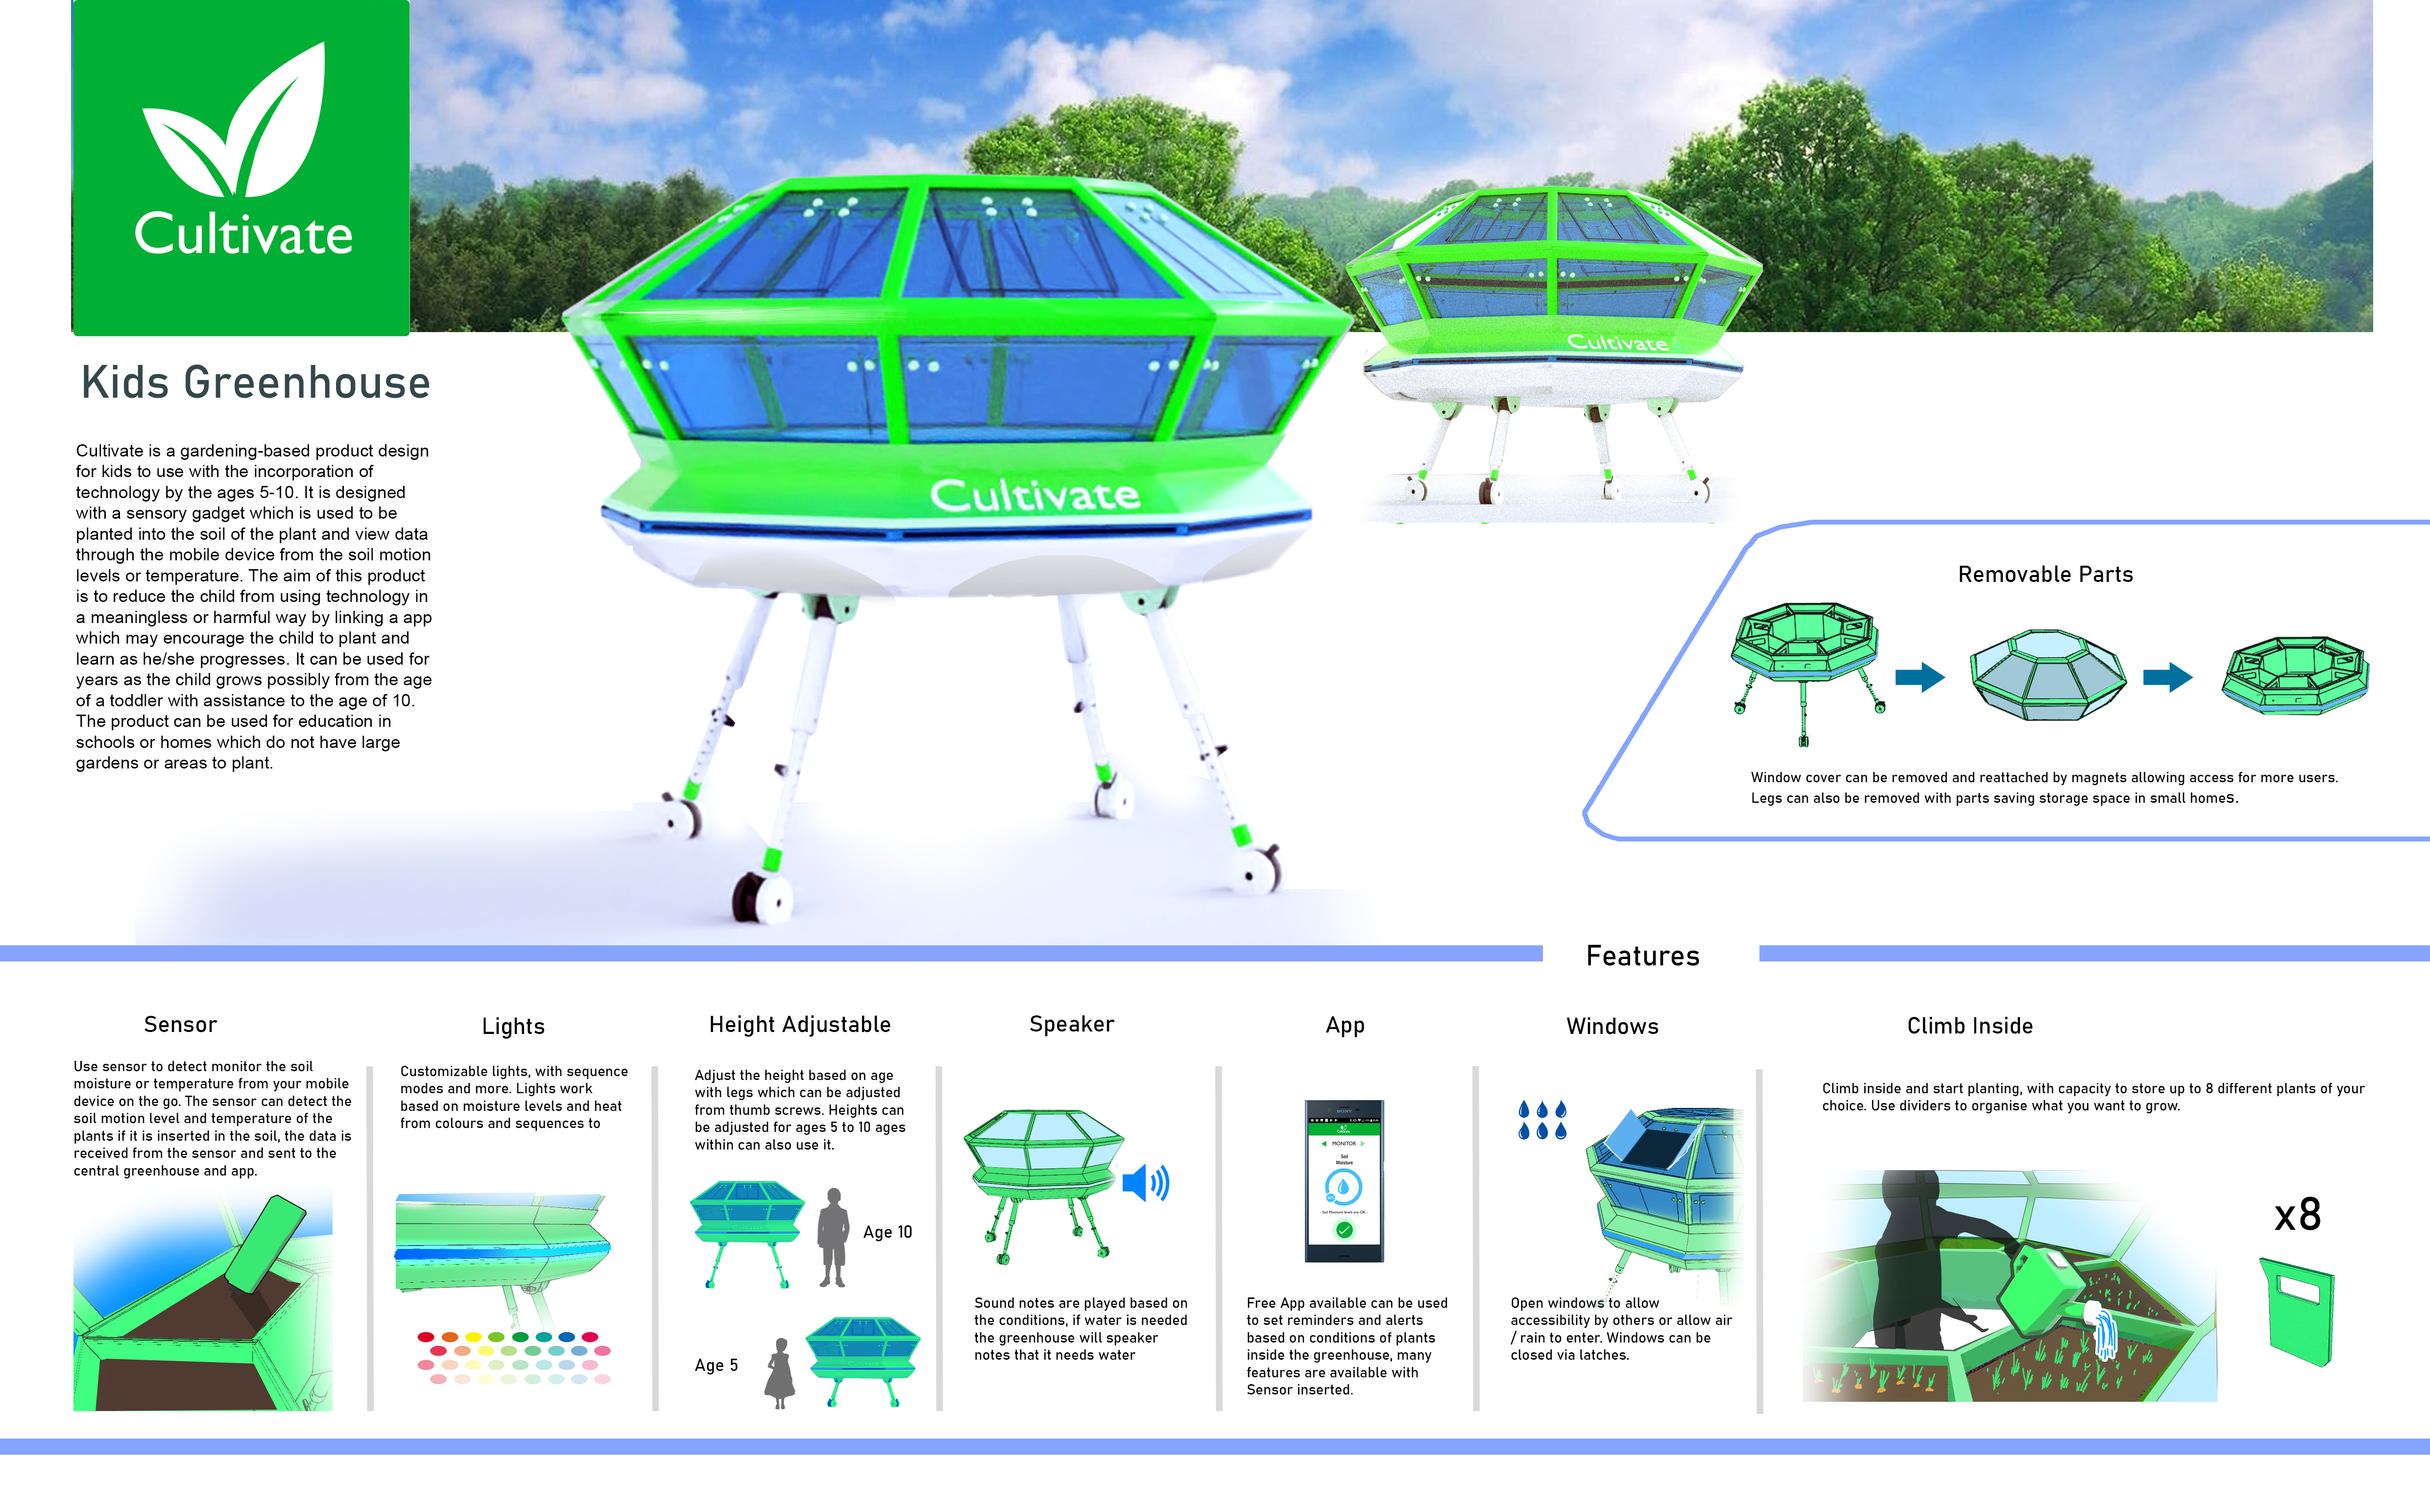 Picture showing features of Israr's interactive greenhouse